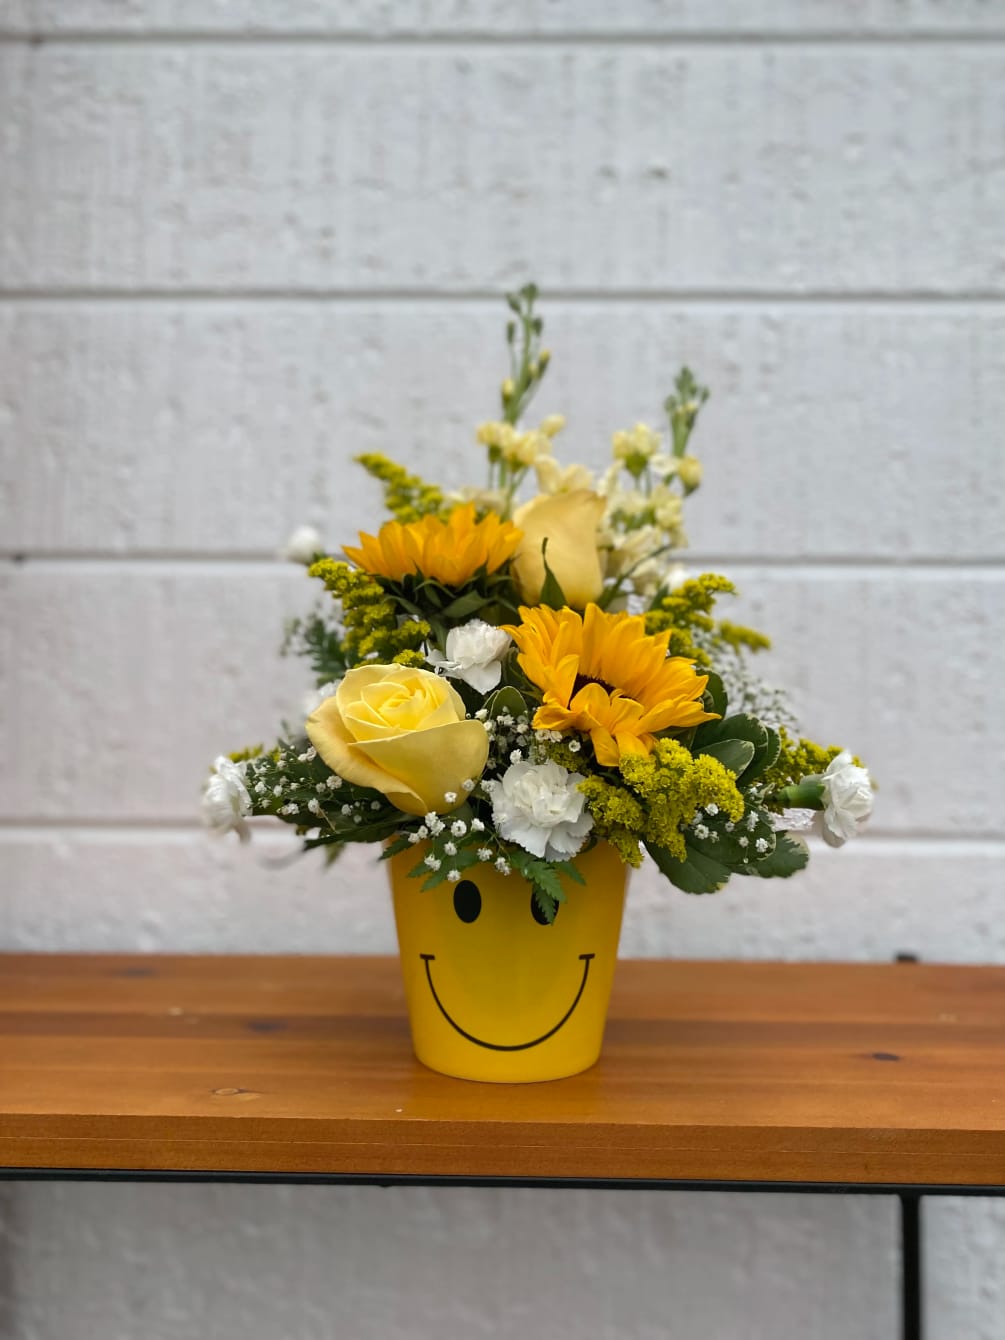 A cheery mix of bright, colorful flowers in a Smiley Container!
Just the